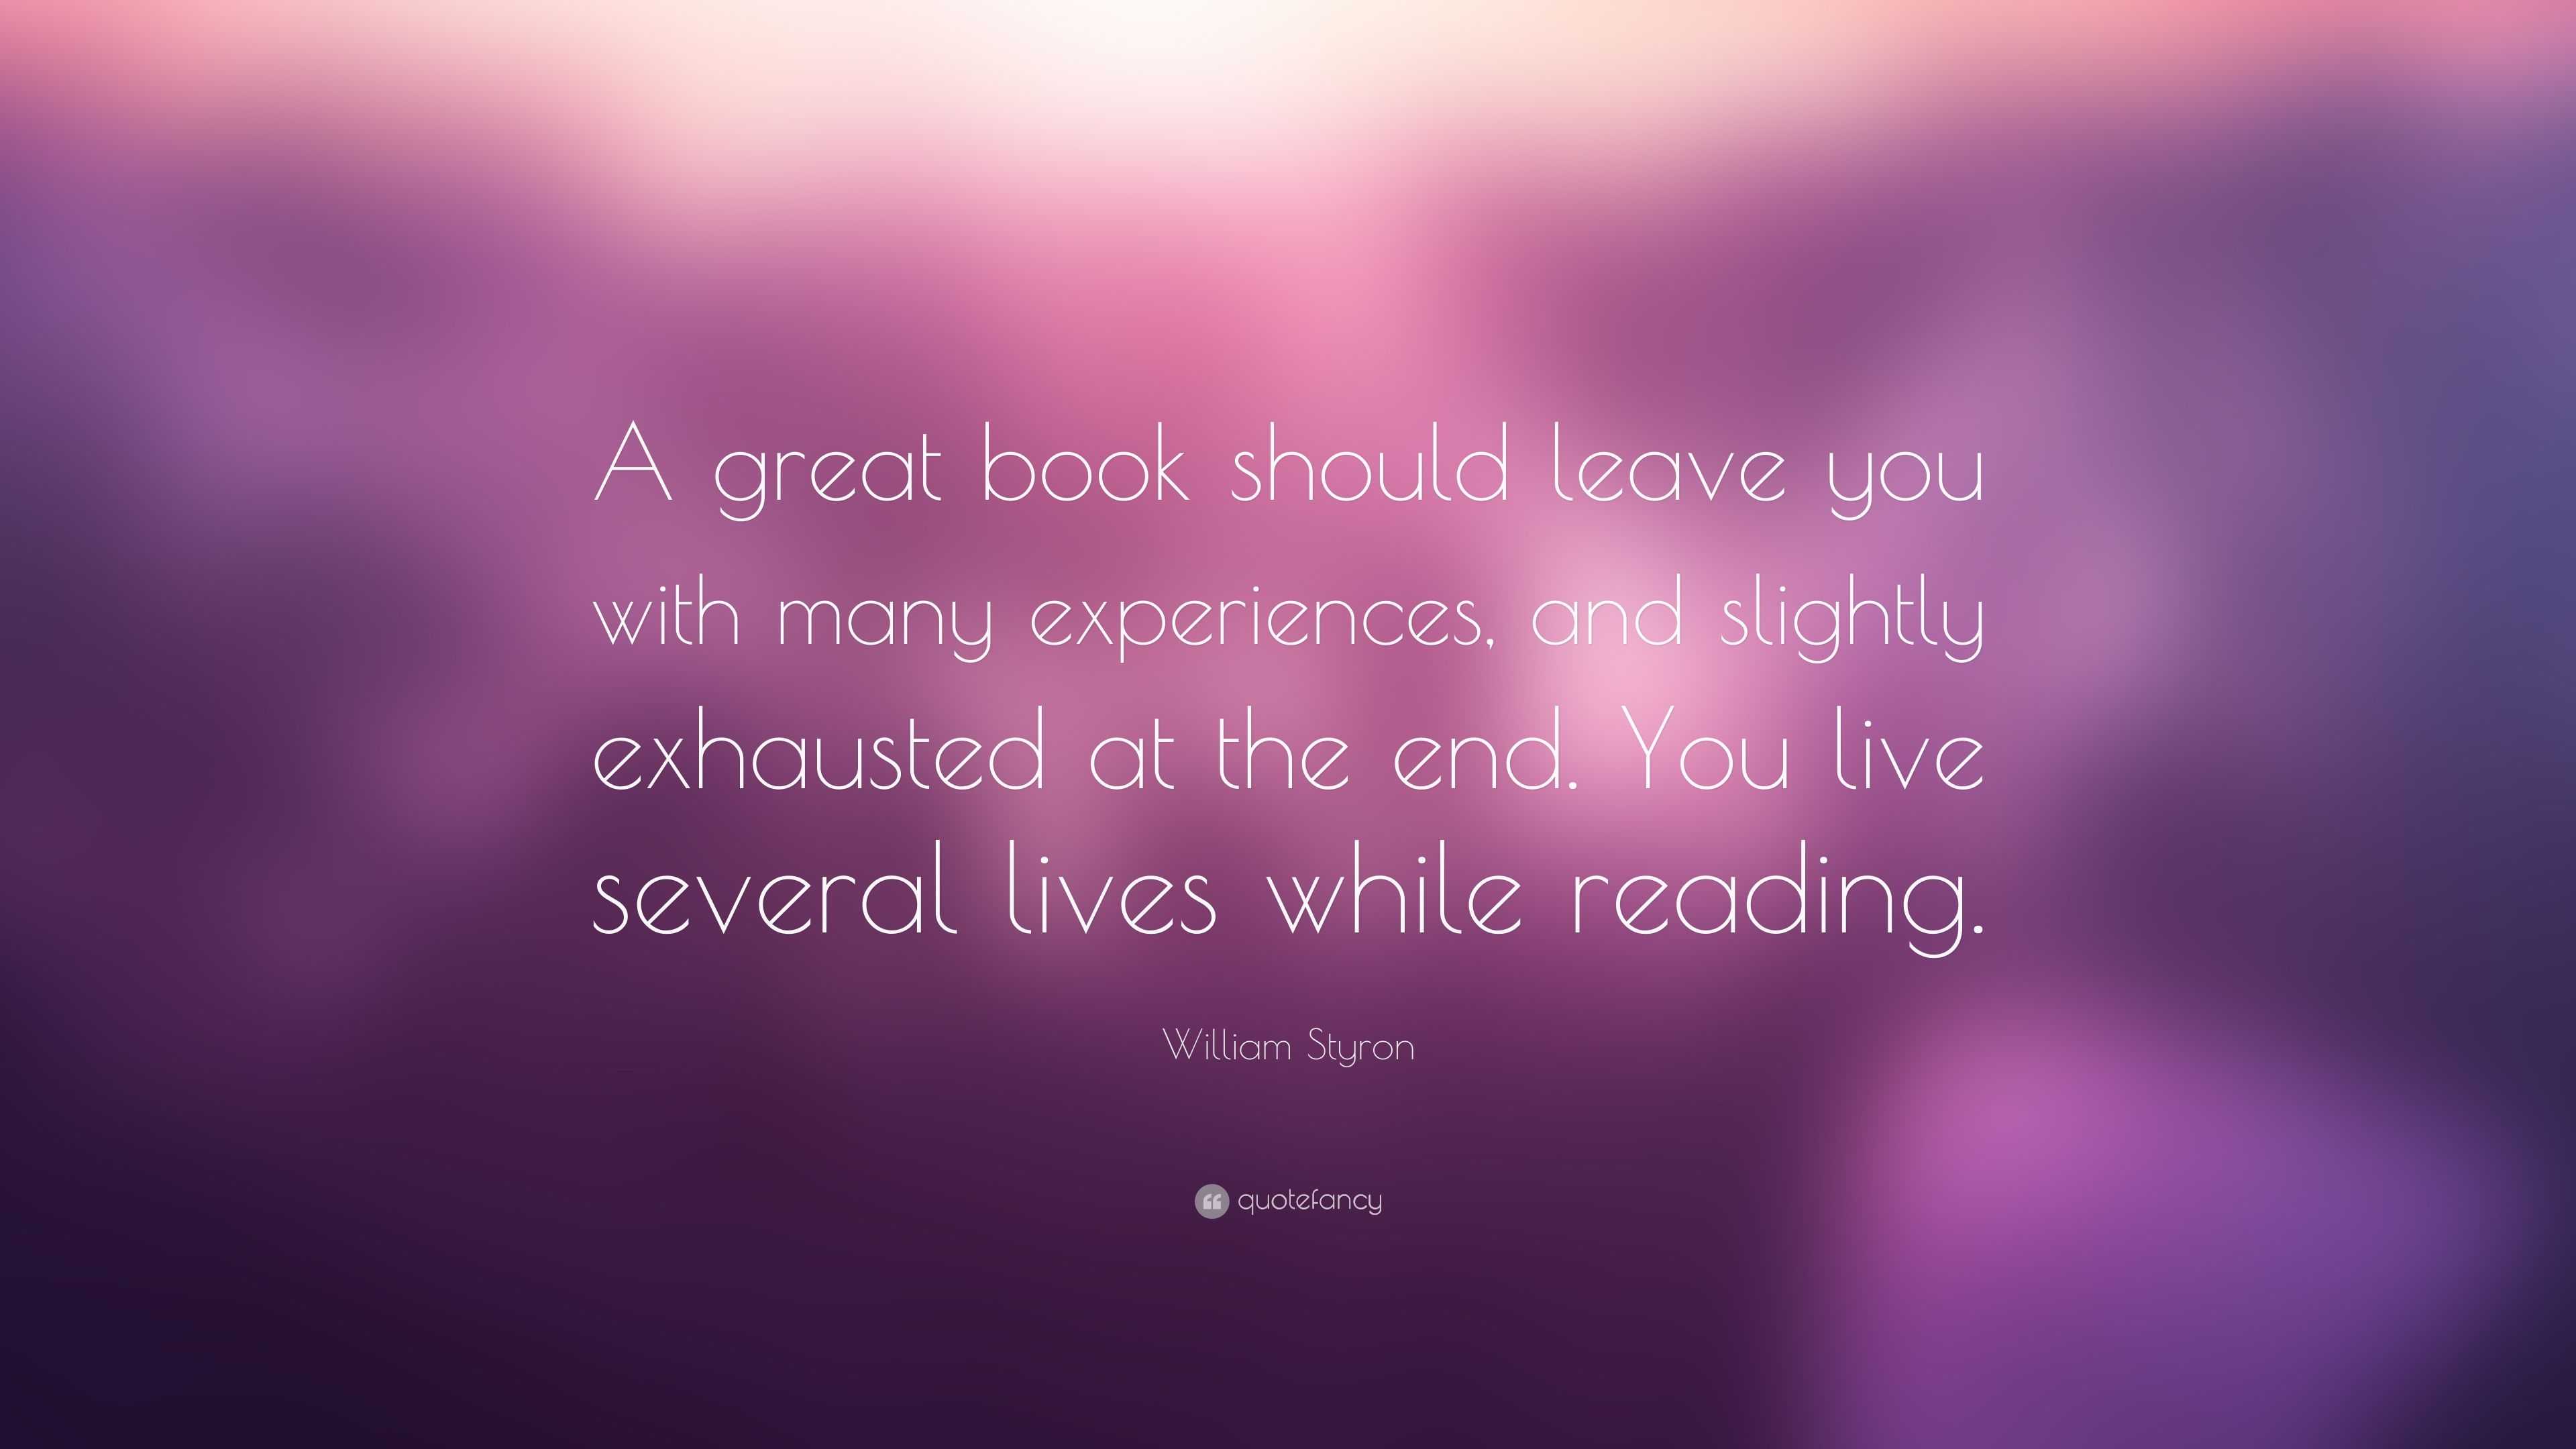 William Styron Quote: “A great book should leave you with many ...